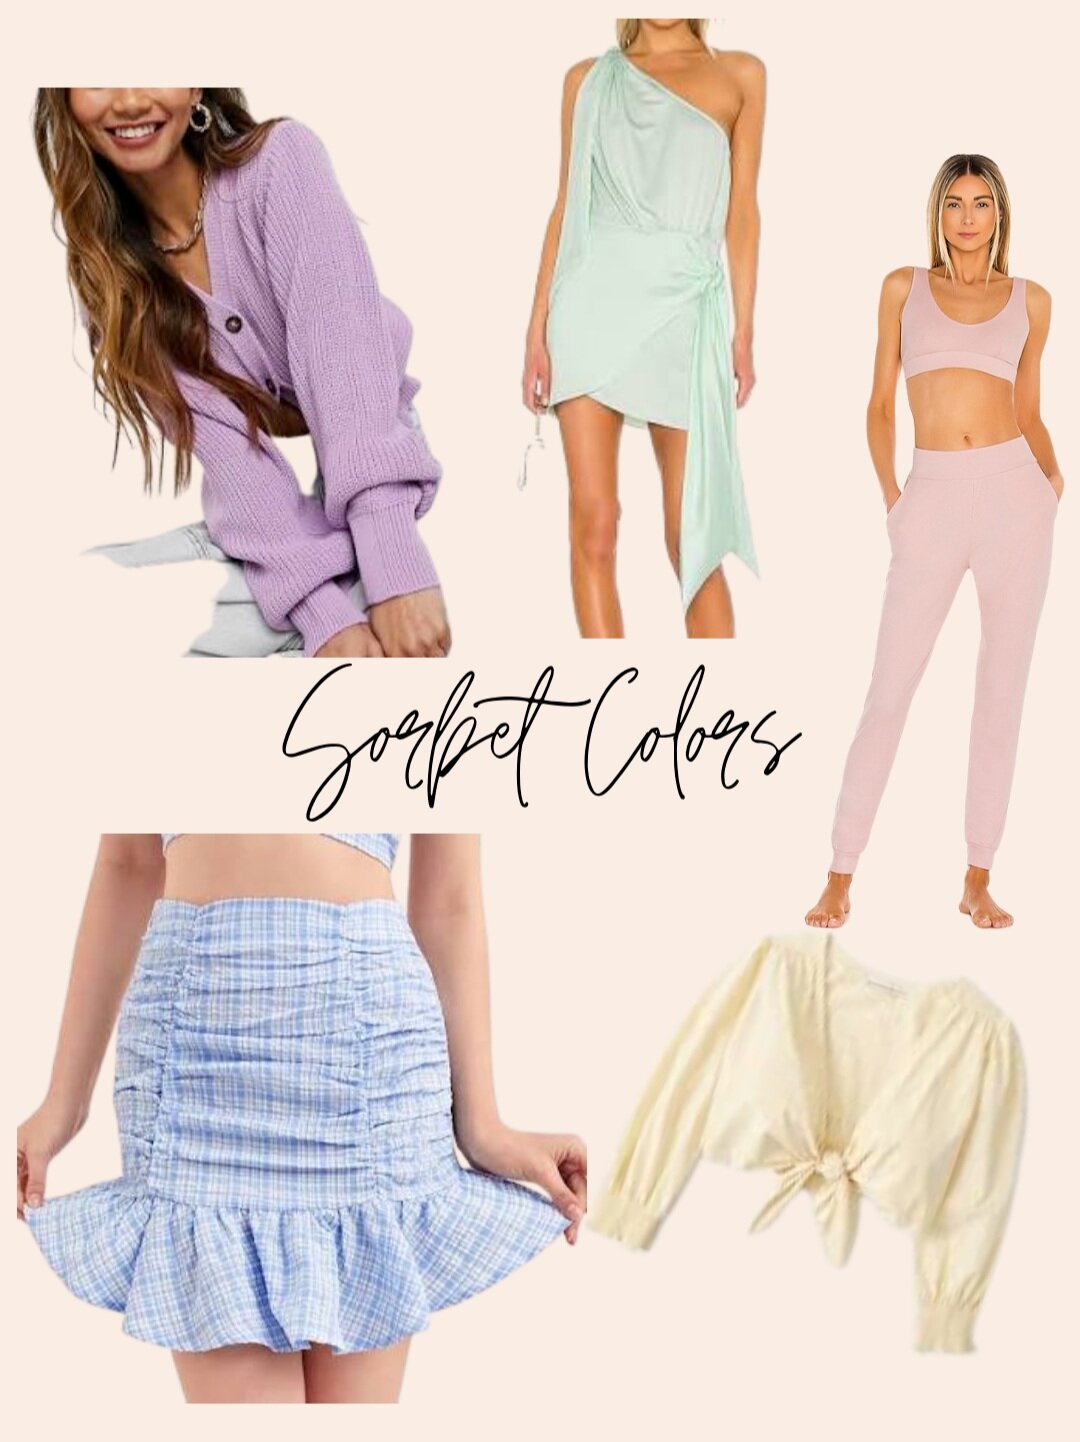 3) Sorbet Colors - I don’t think it’s possible to be sad while wearing these happy colors, resembling a child’s scoop of ice cream on a warm spring day. And mixed together, they are even more gorgeous!